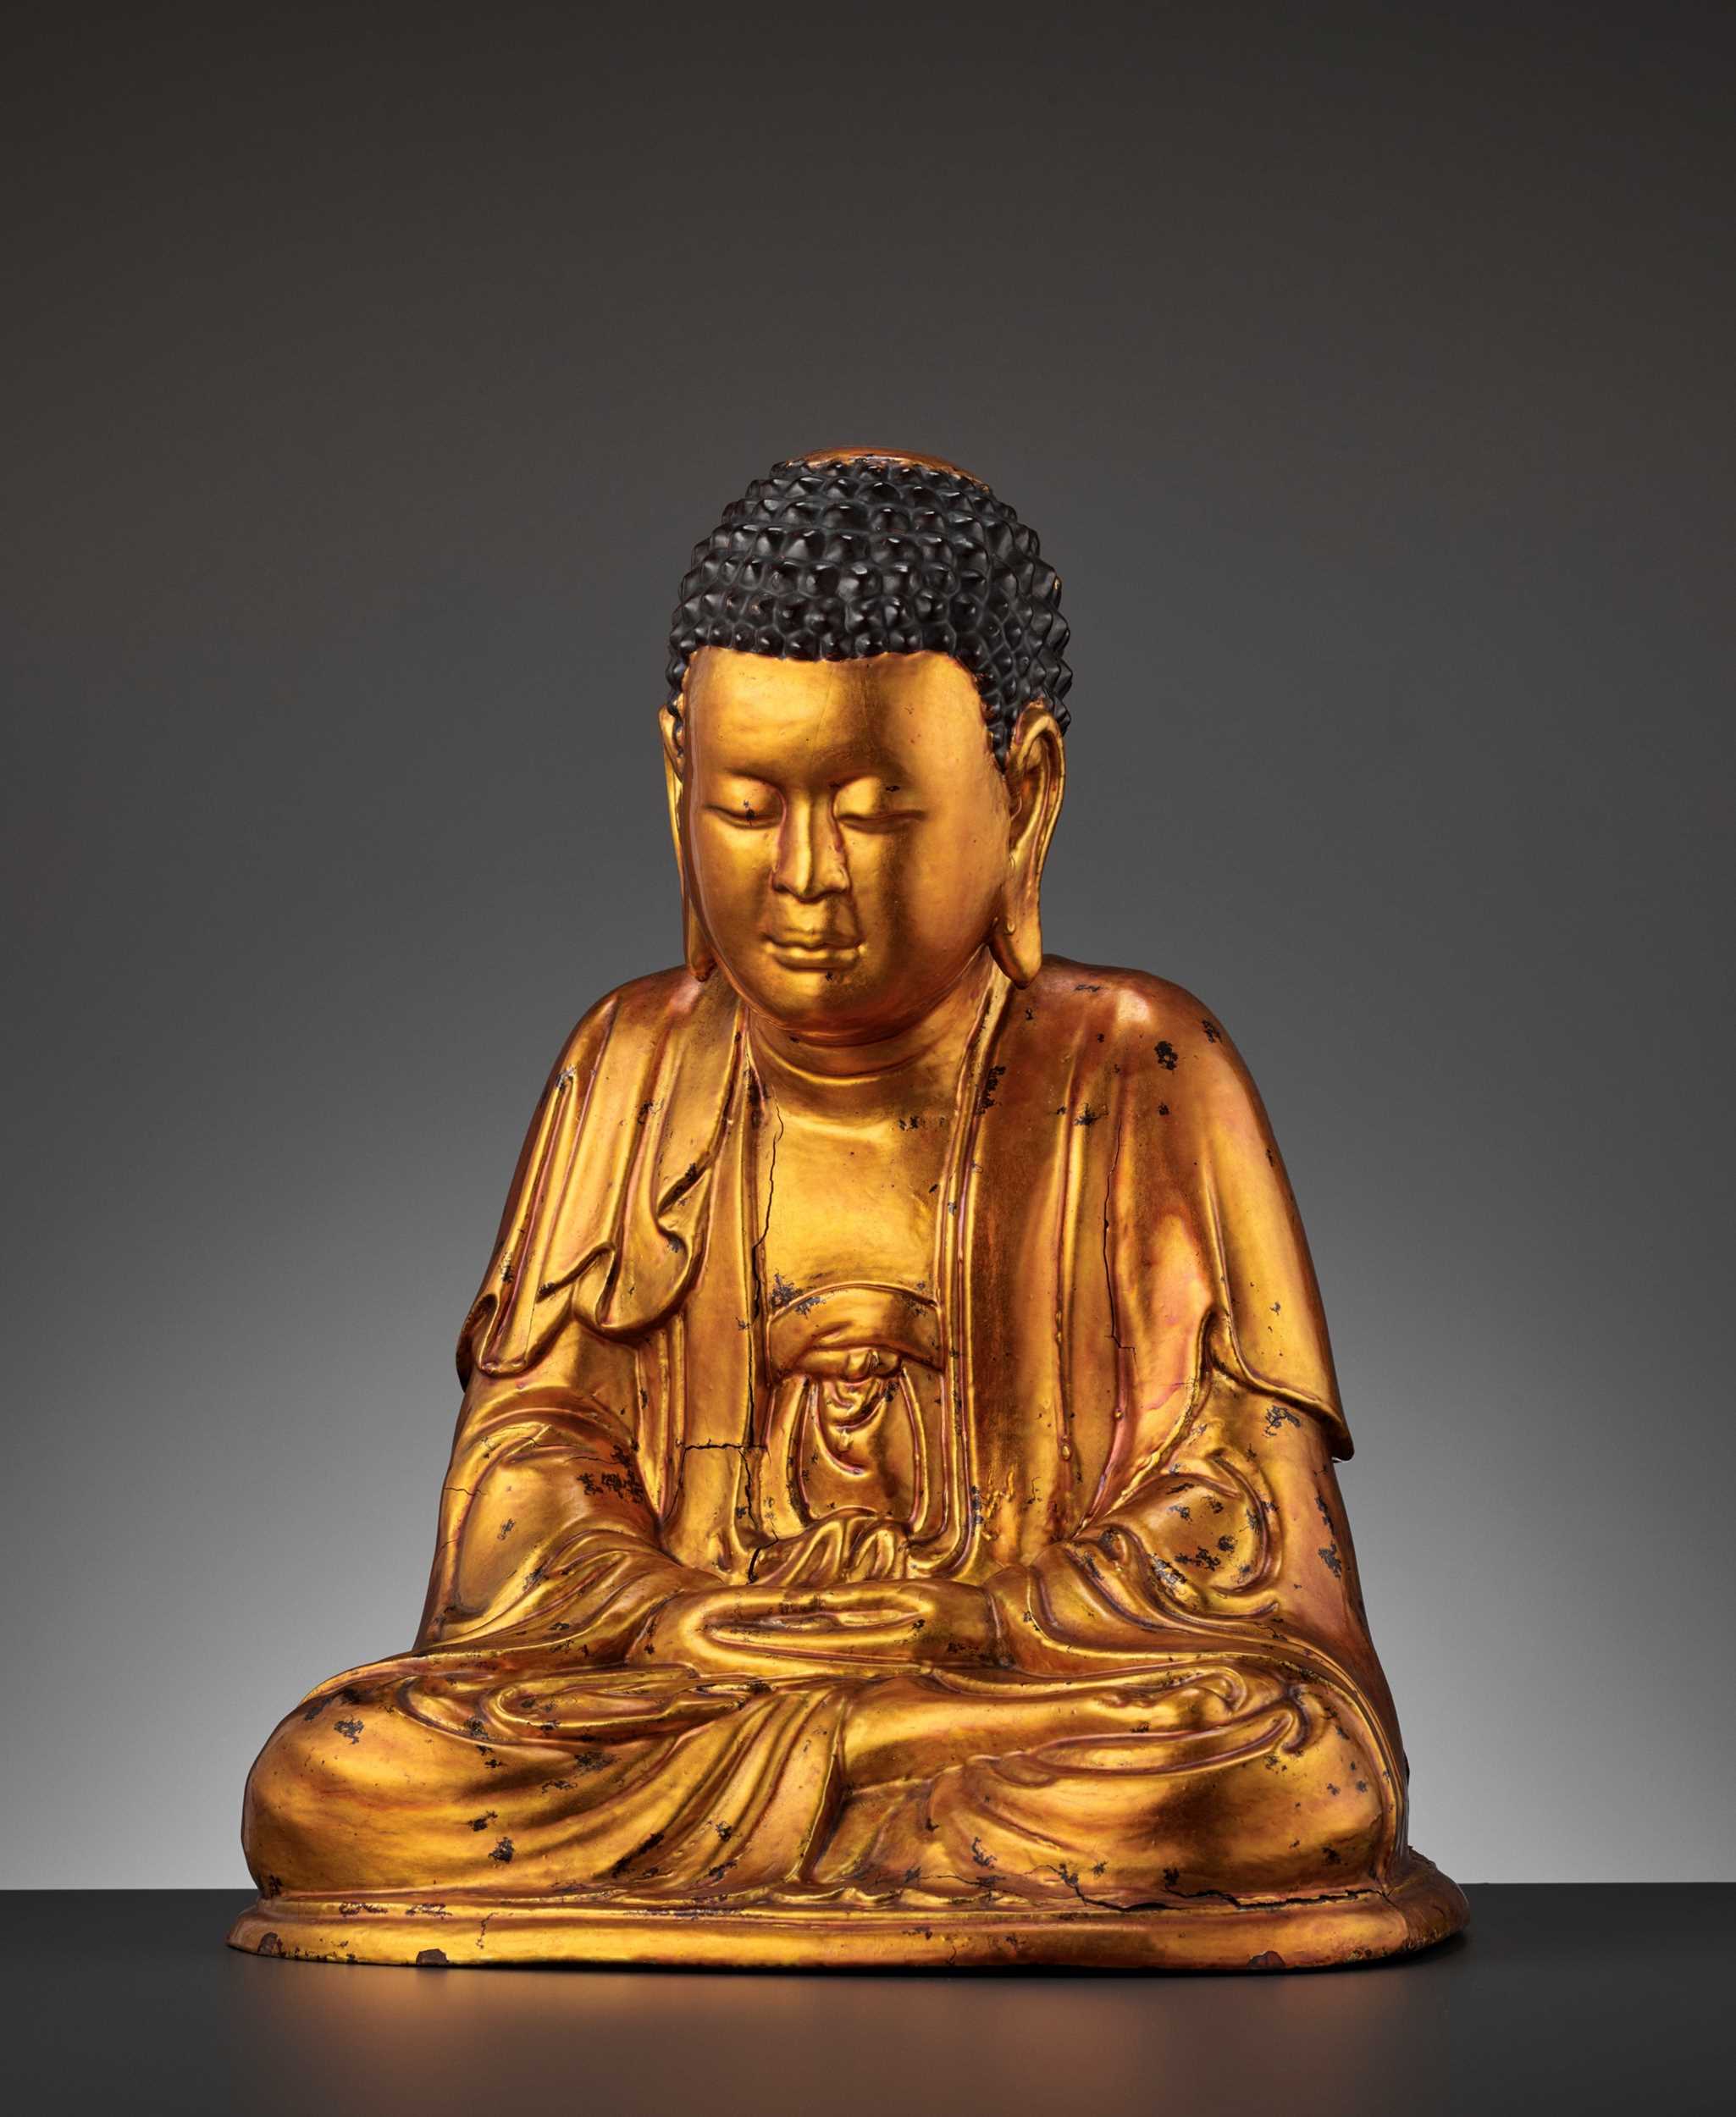 Lot 584 - A MASSIVE GILT-LACQUERED WOOD FIGURE OF BUDDHA, 18TH-19TH CENTURY